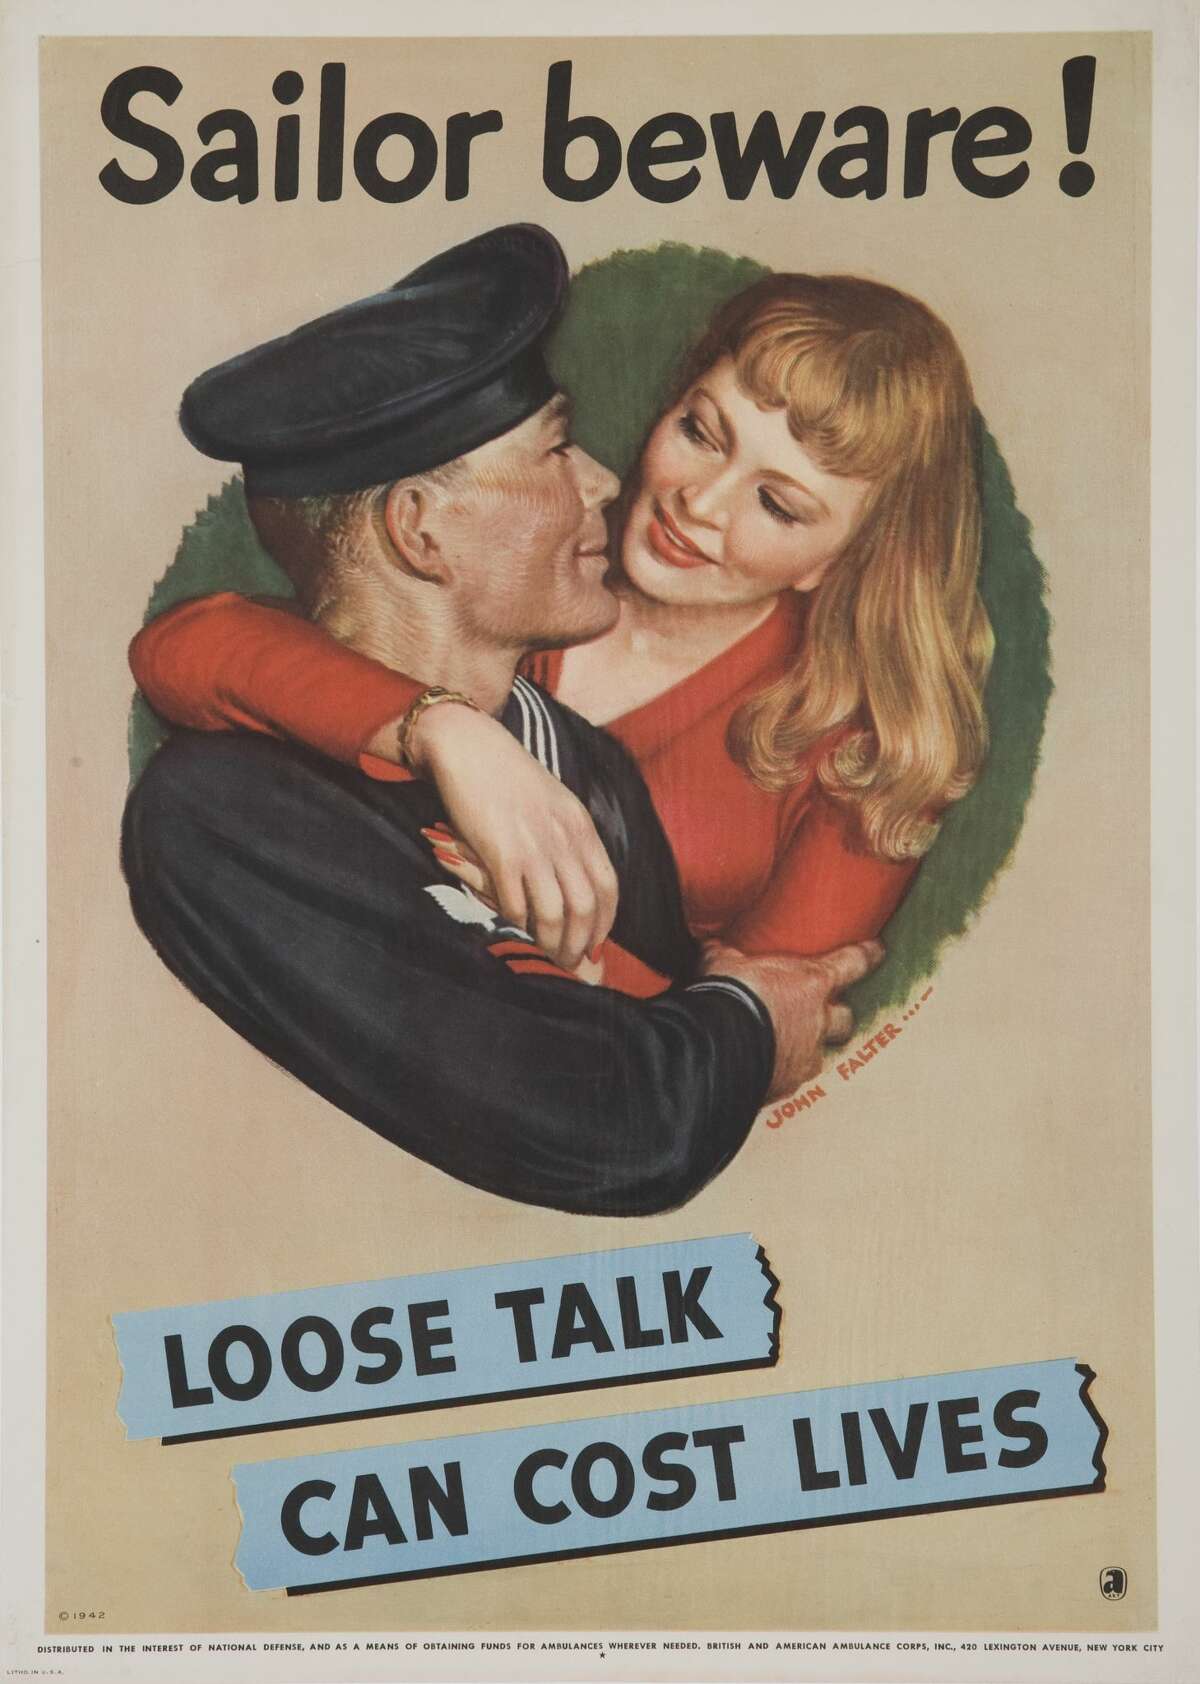 Sailors were reminded that careless words shouldn't be spoken to their female dates, who could be spies.